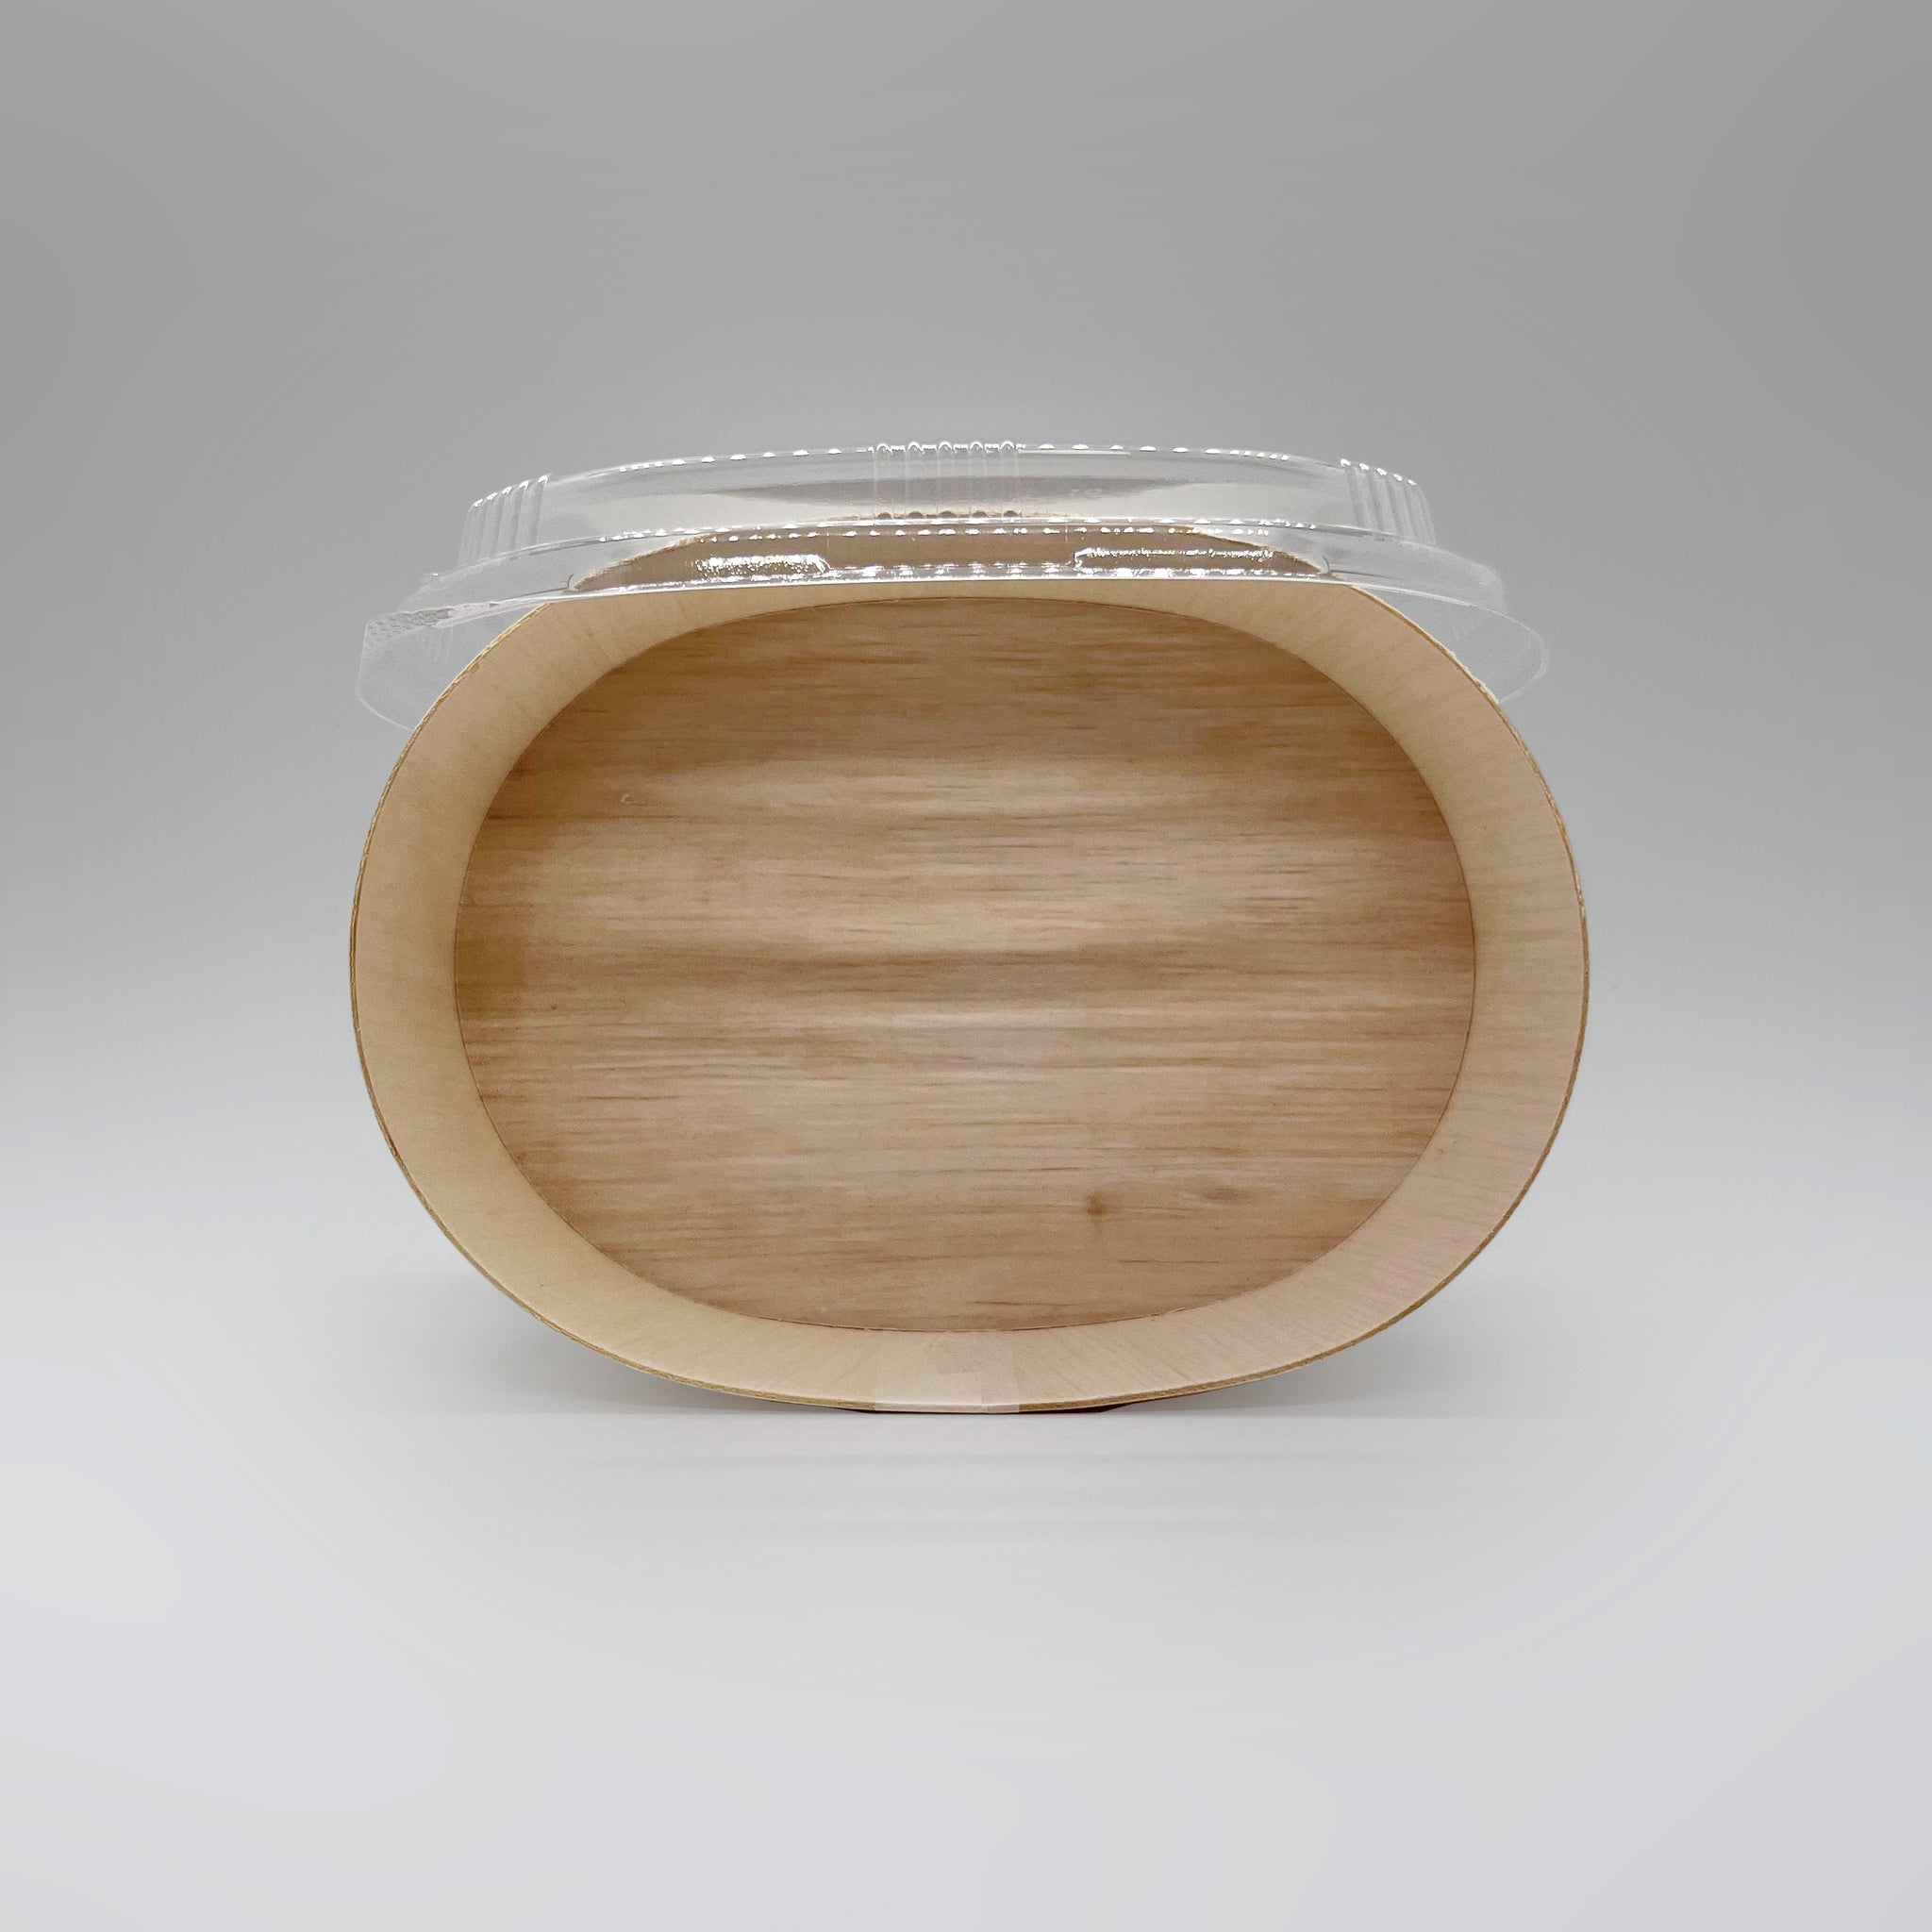 # 1 Sushi Container Base and Lid Wooden Pattern - 600/Case